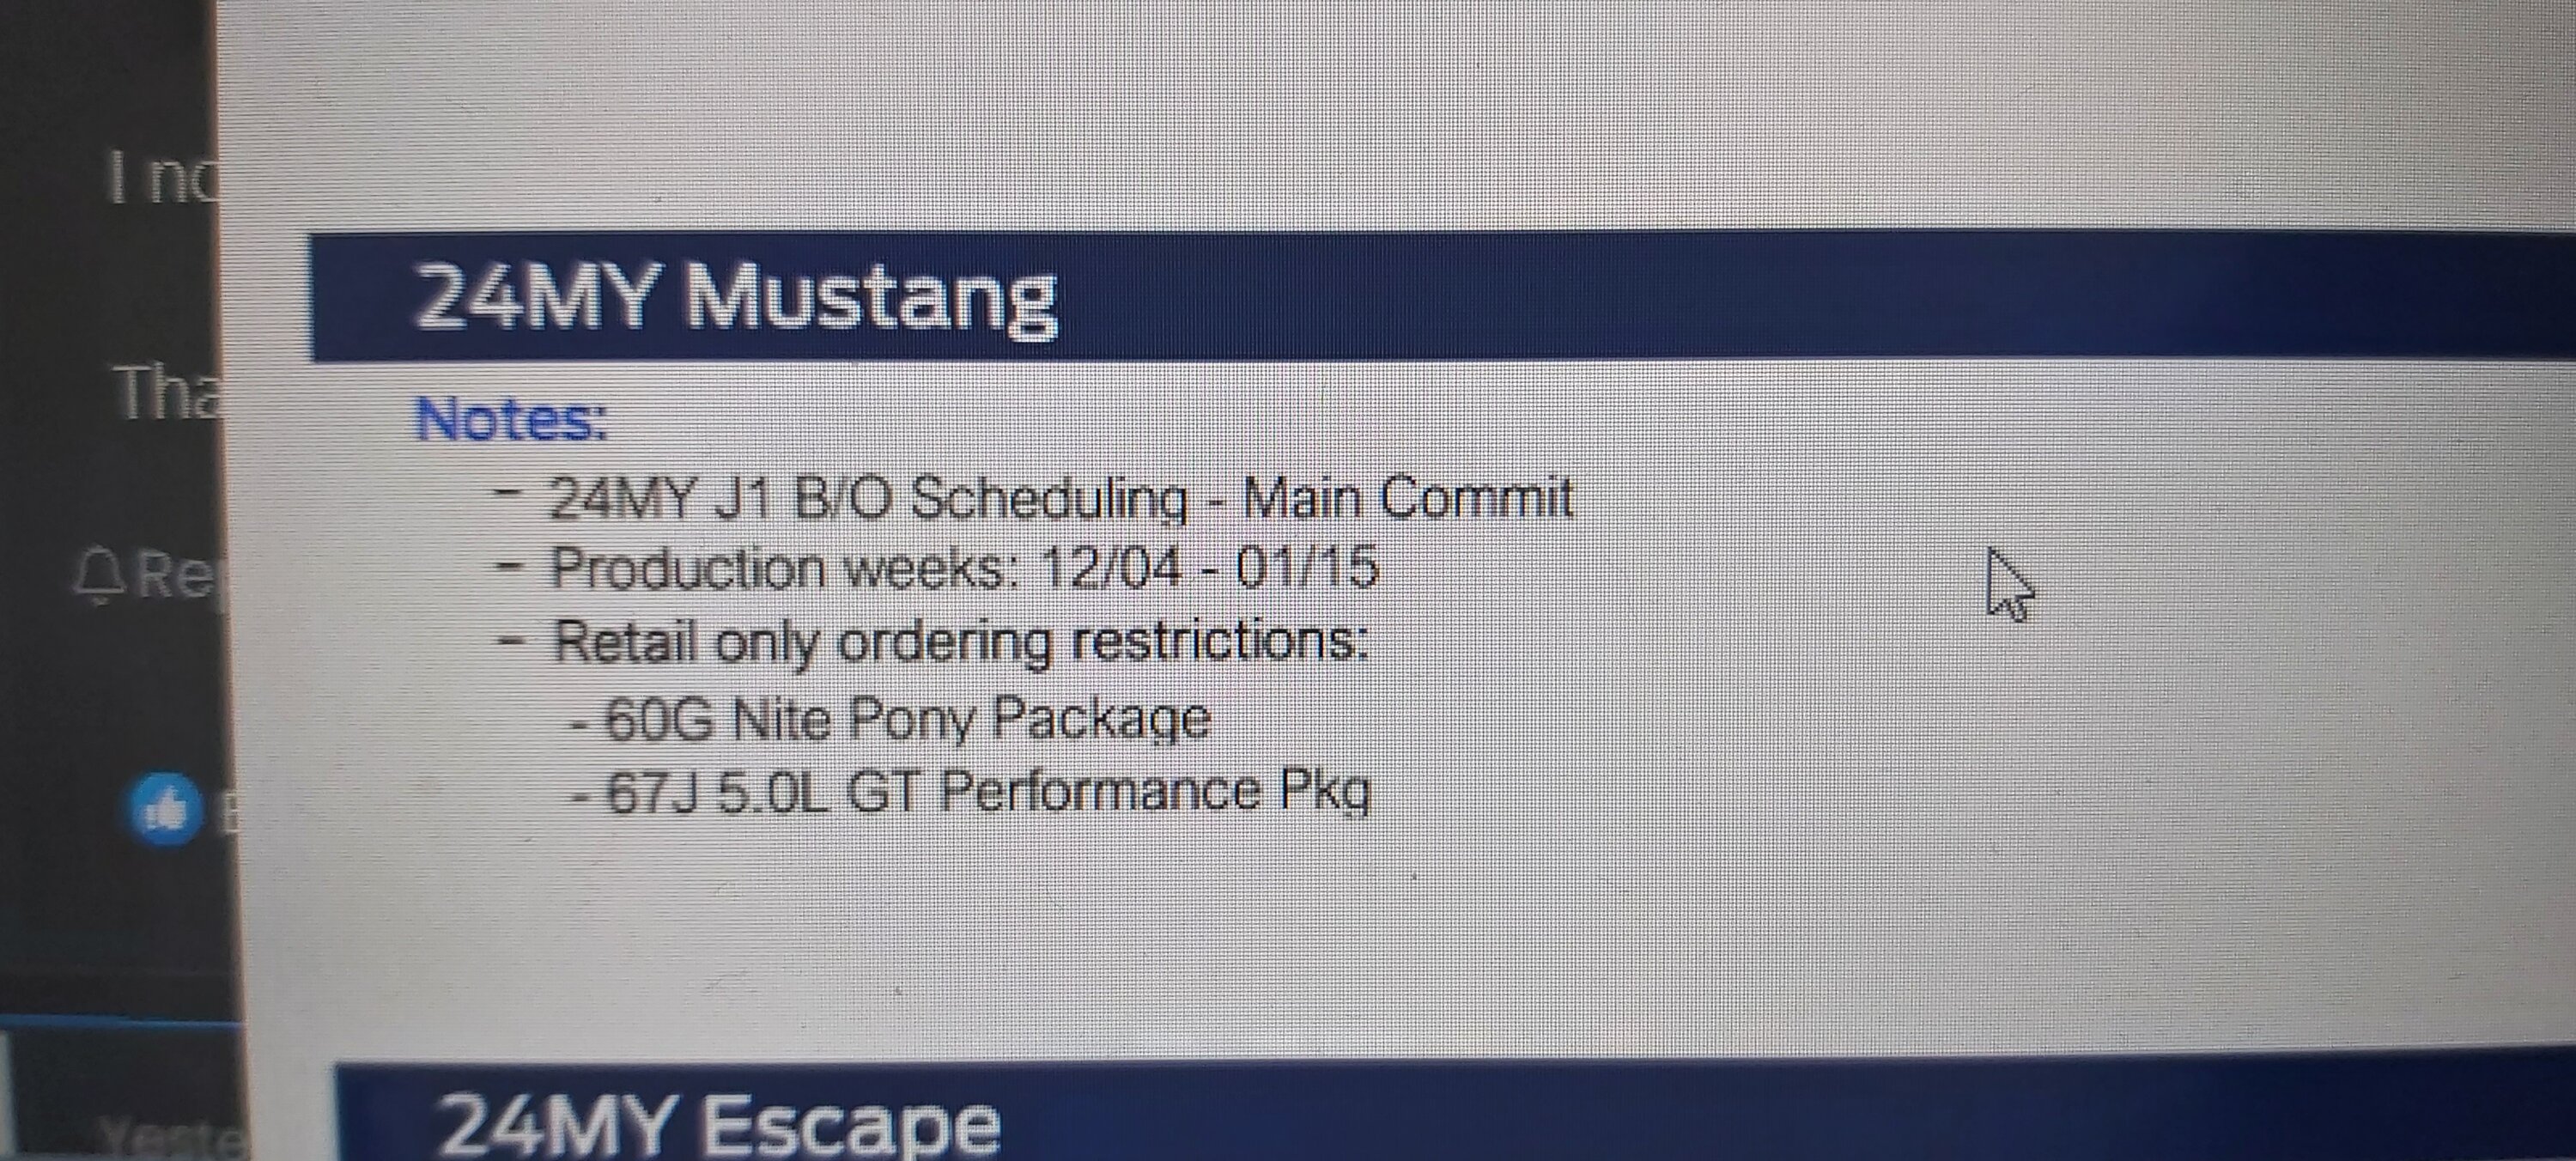 S650 Mustang 2024 Mustang Job 1 Balance Out Scheduling This Week (10/26/23) for Production Weeks 12/4 - 1/15 Mustang Build